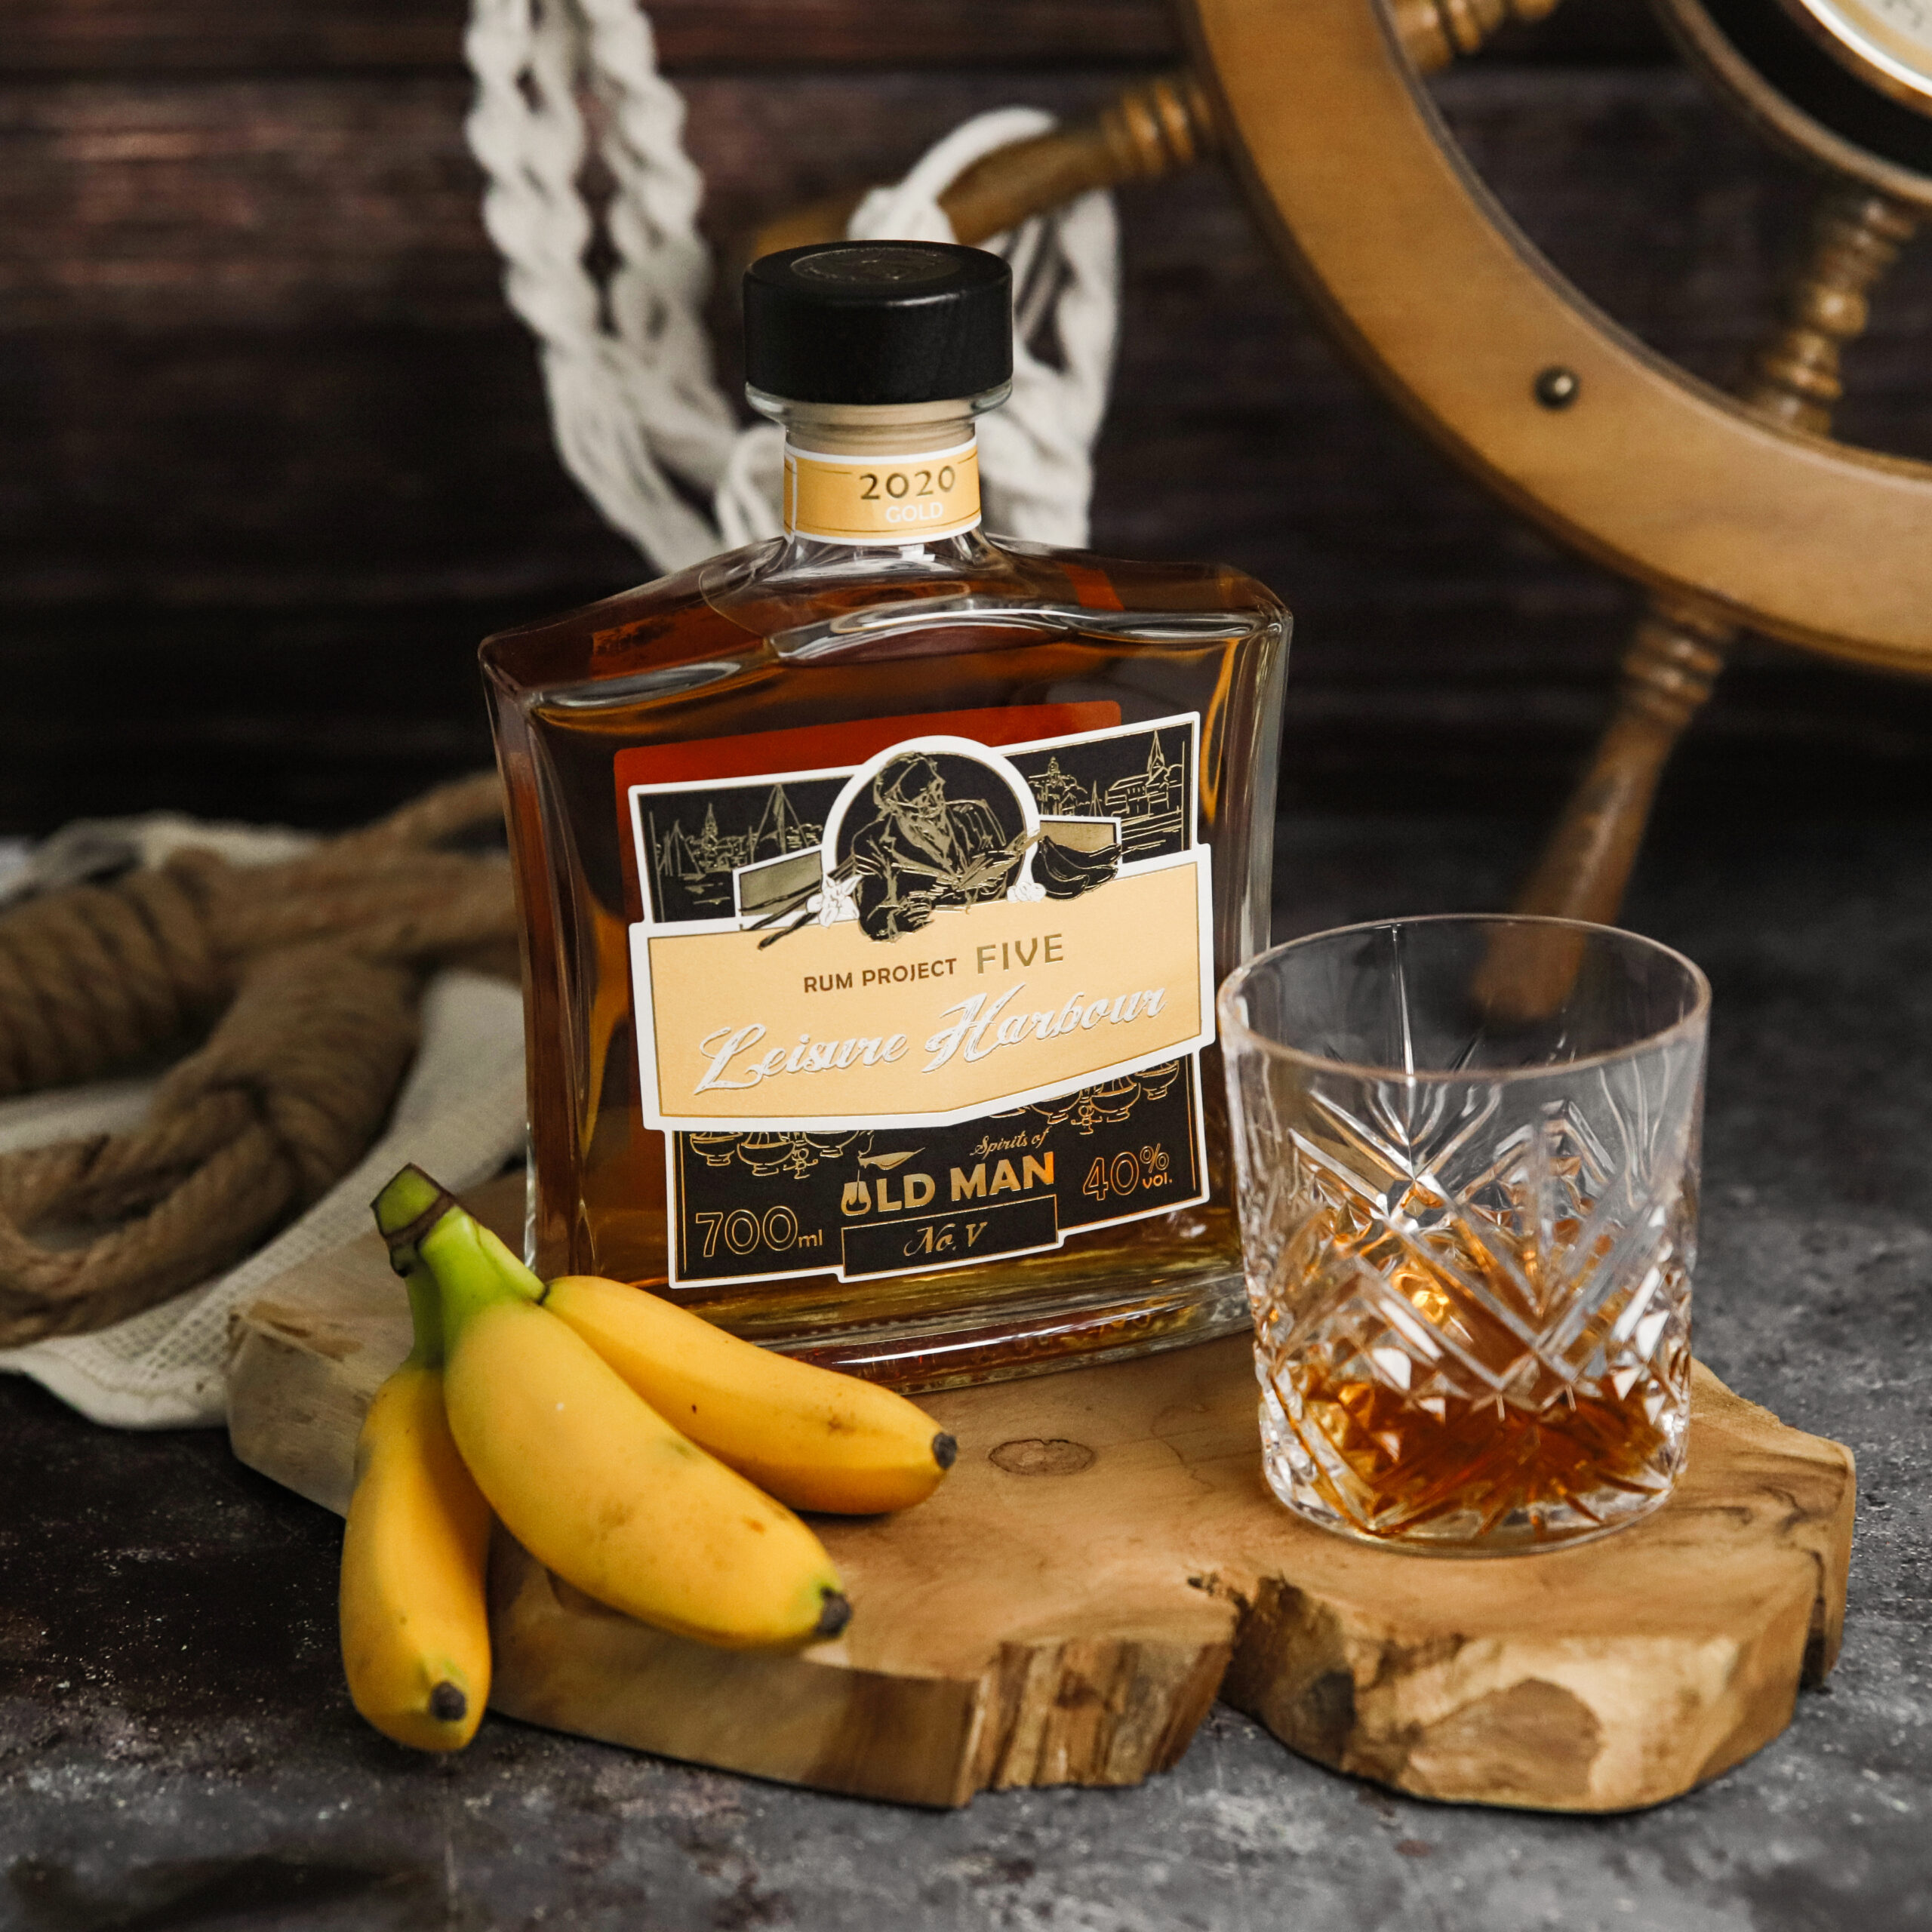 "Rum Project Five" (Leisure Harbour) by Spirits of Old Man 40% 0,7l